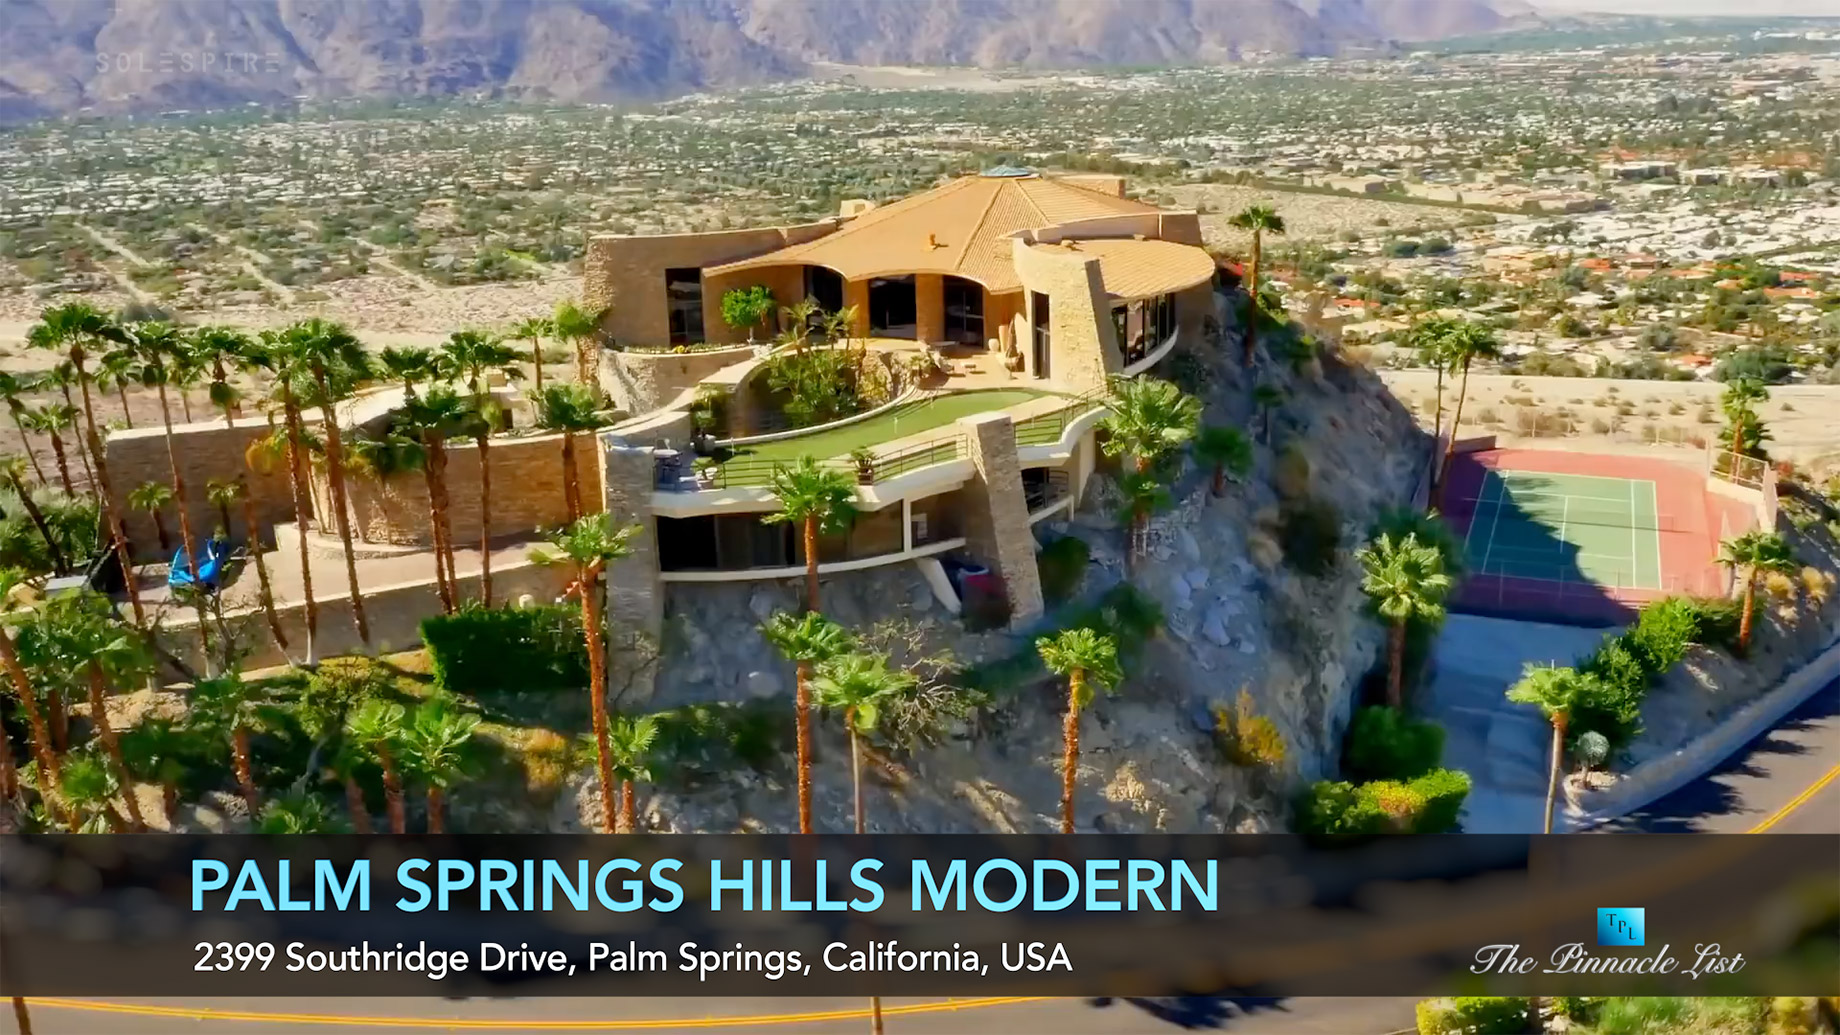 Palm Springs Hills Modern Luxury Home - 2399 Southridge Dr, Palm Springs, CA, USA - Luxury Real Estate - Video